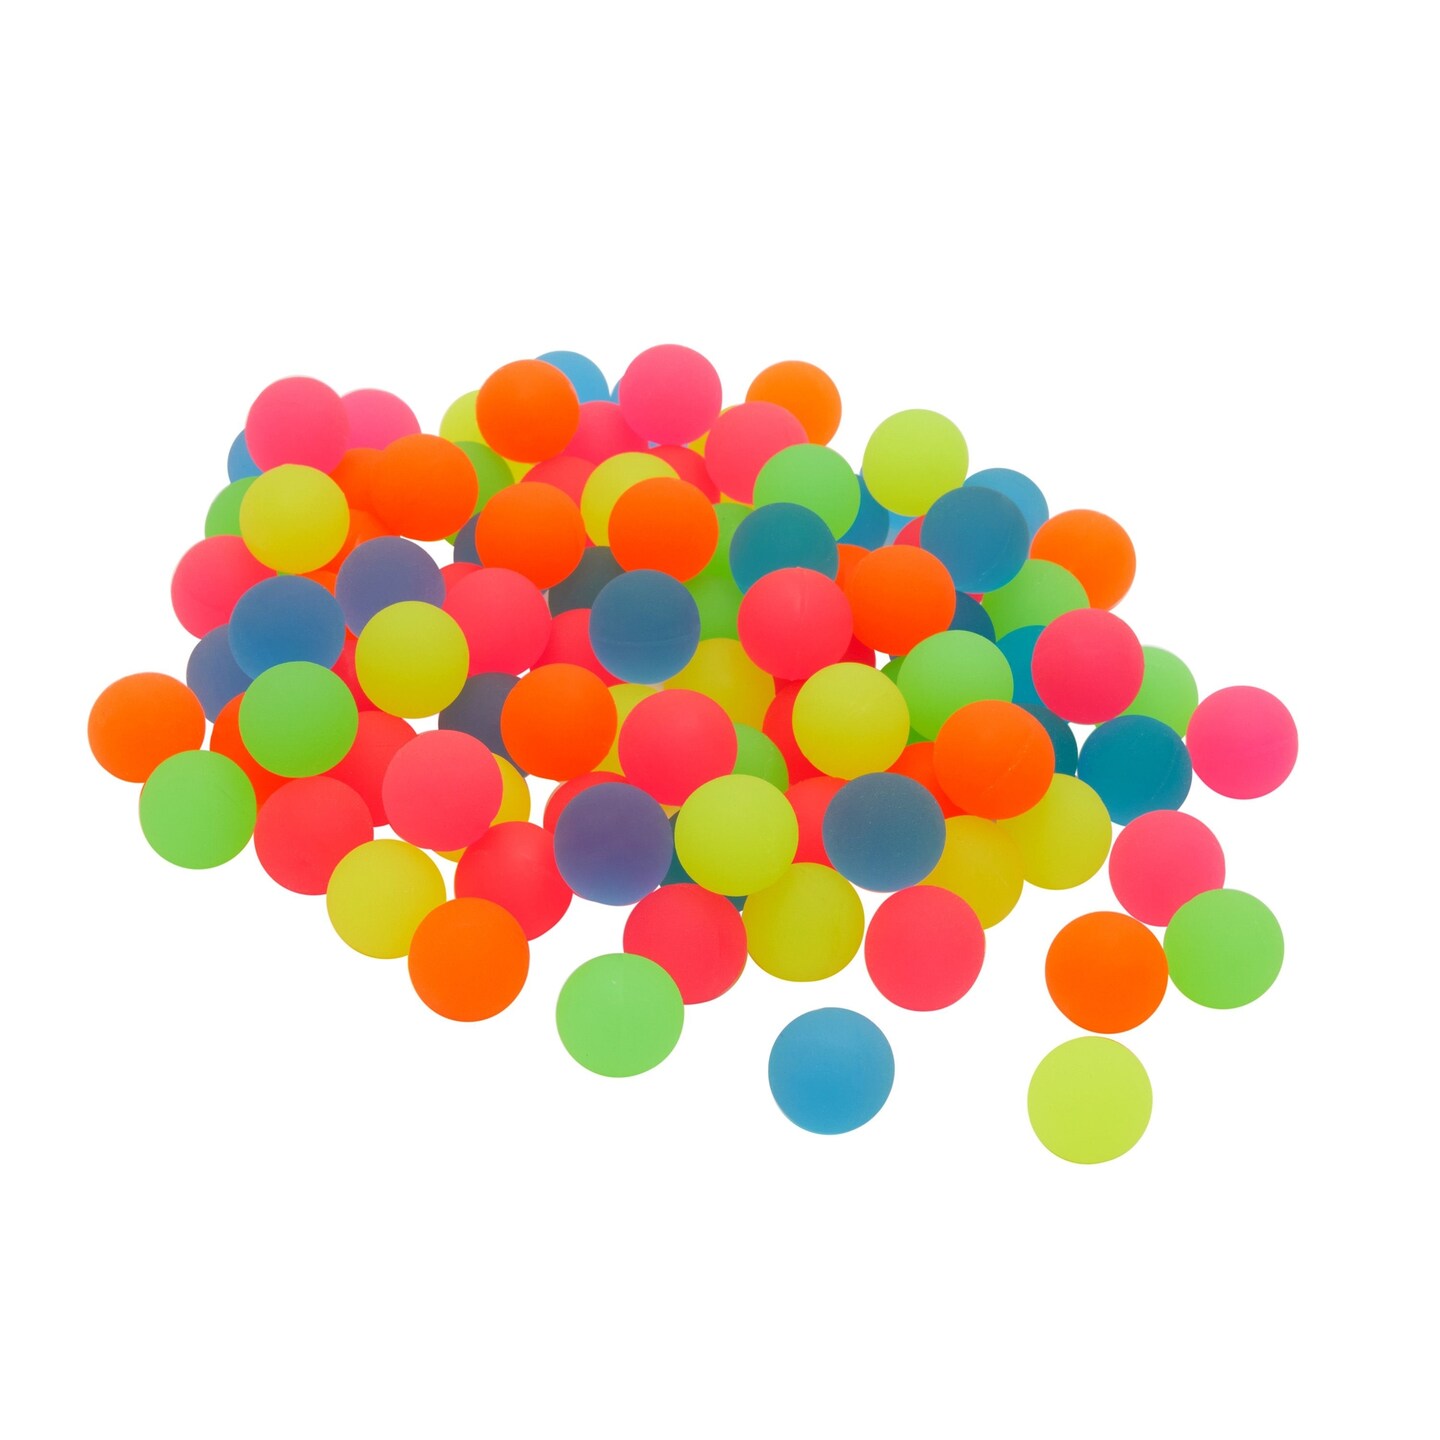 100 Pack Colorful Bouncy Balls Party Favors for Kids Aged 5+, Rubber Super  Bounce Balls Bulk for Birthday, Prizes, Gifts (Neon Colors, 1 inch)